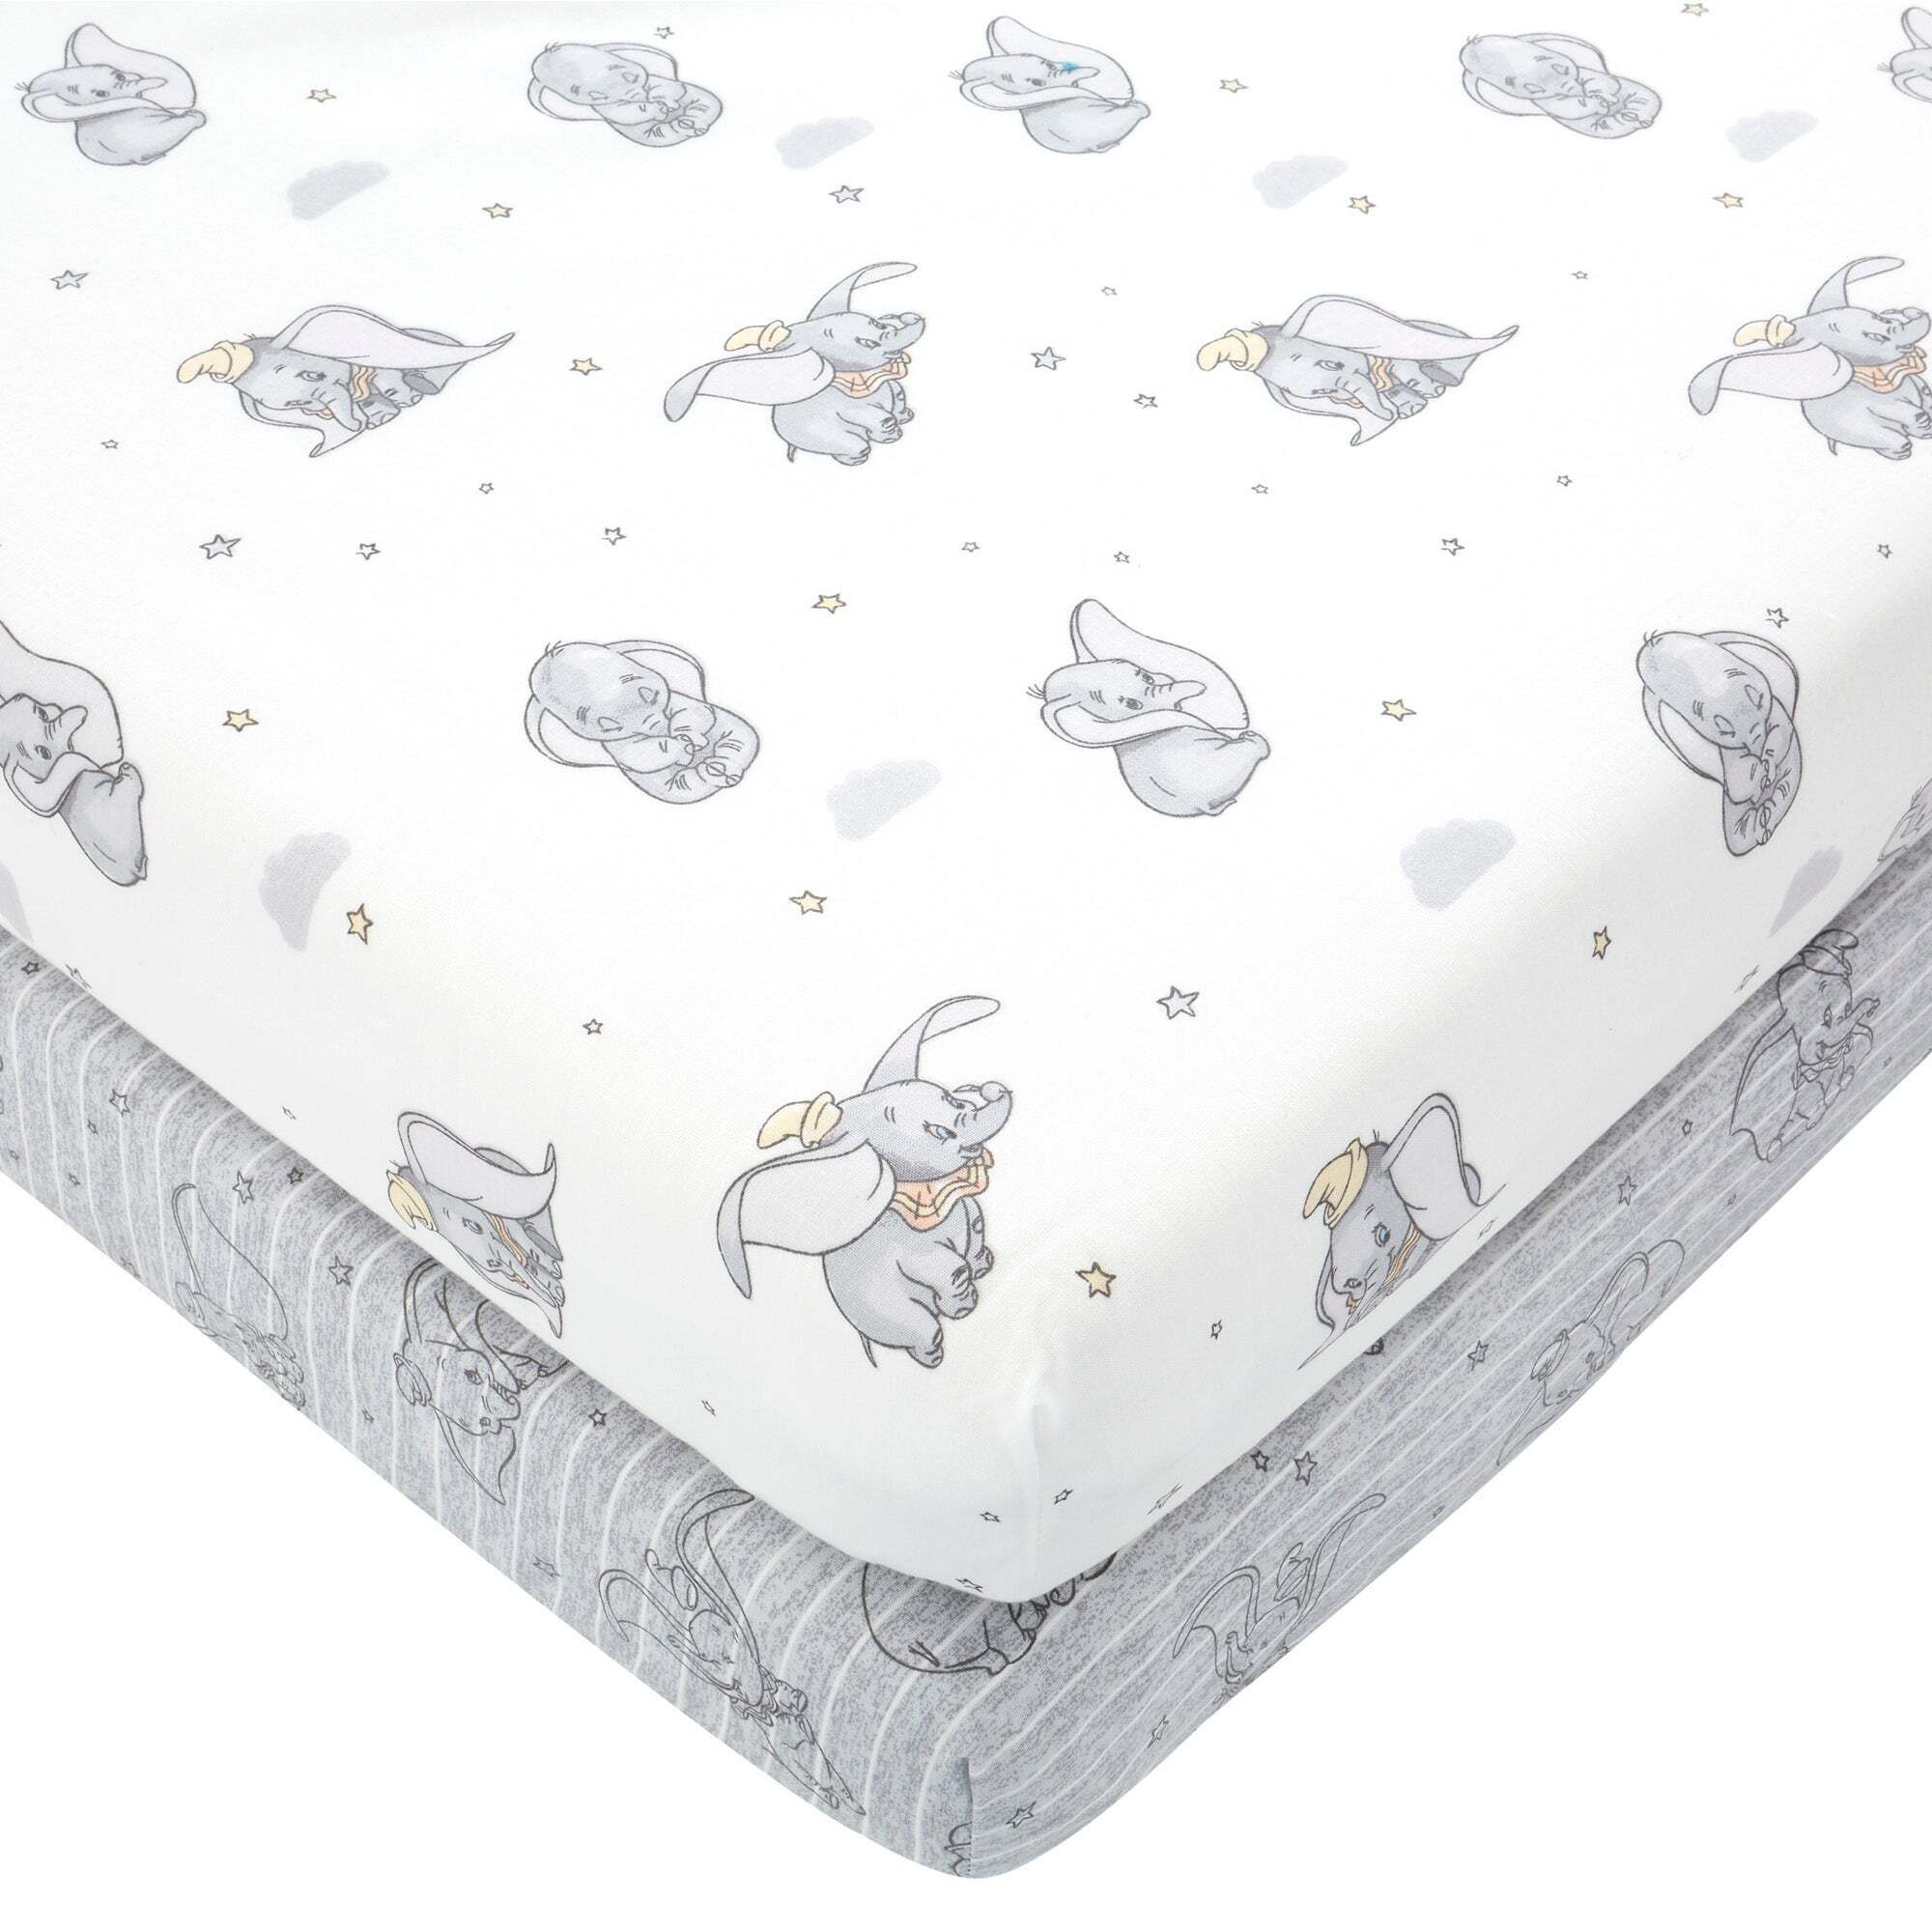 Dumbo 100% Cotton Pack of 2 Fitted Sheets Grey/White